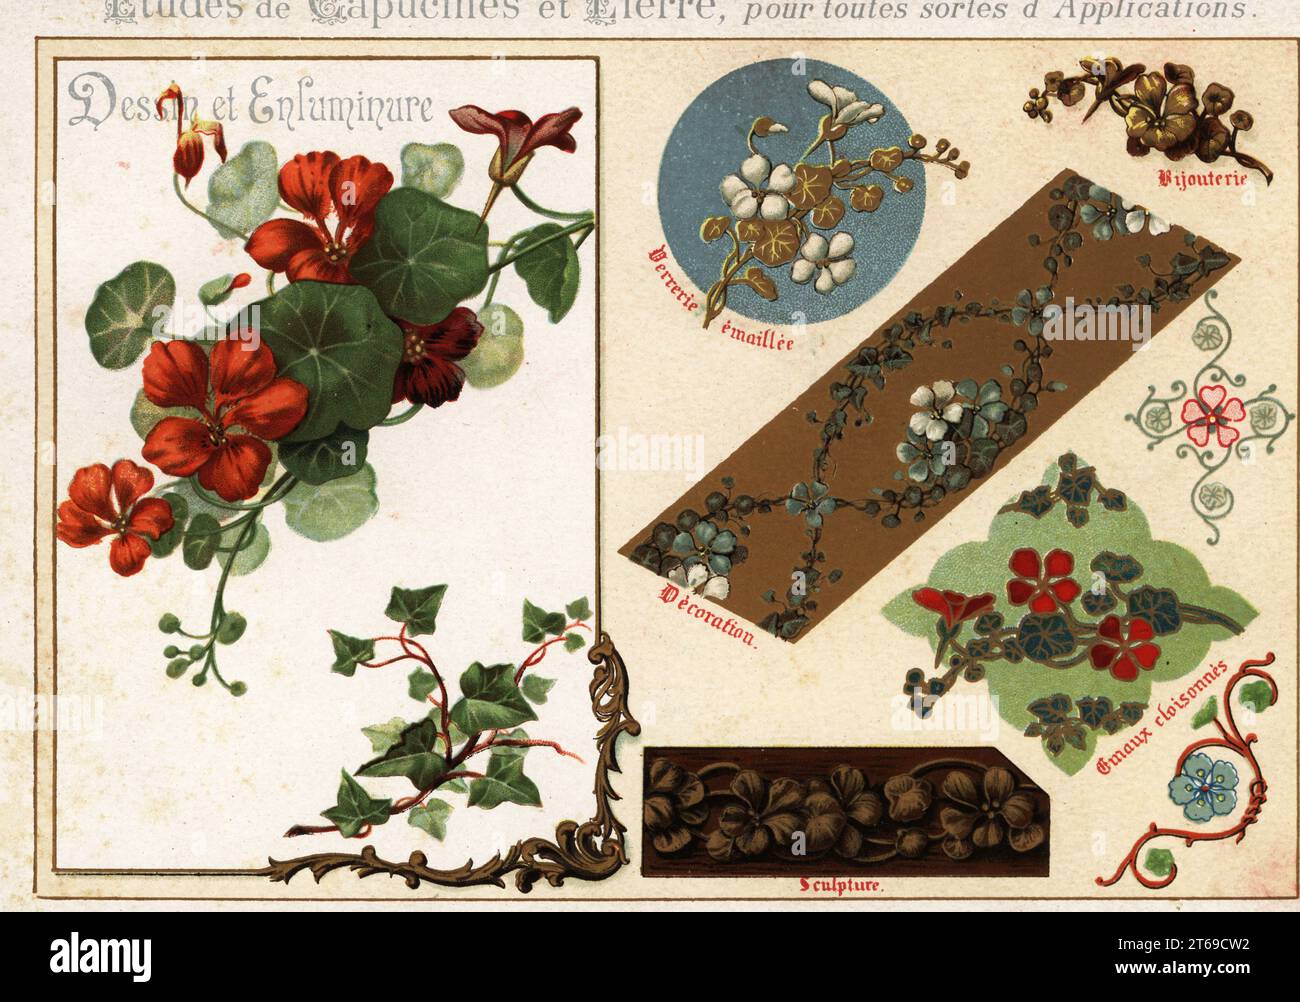 Images of nasturtium and ivy from manuscripts and their applications in jewelry, enamel glassware, decoration, cloisonne enamel and sculpture. Chromolithograph designed and lithographed by Ernst Guillot from his Flowers After Nature and Ornamental Flowers, Fleurs d`apres Nature et fleurs ornementales, Paris, 1890. Stock Photo